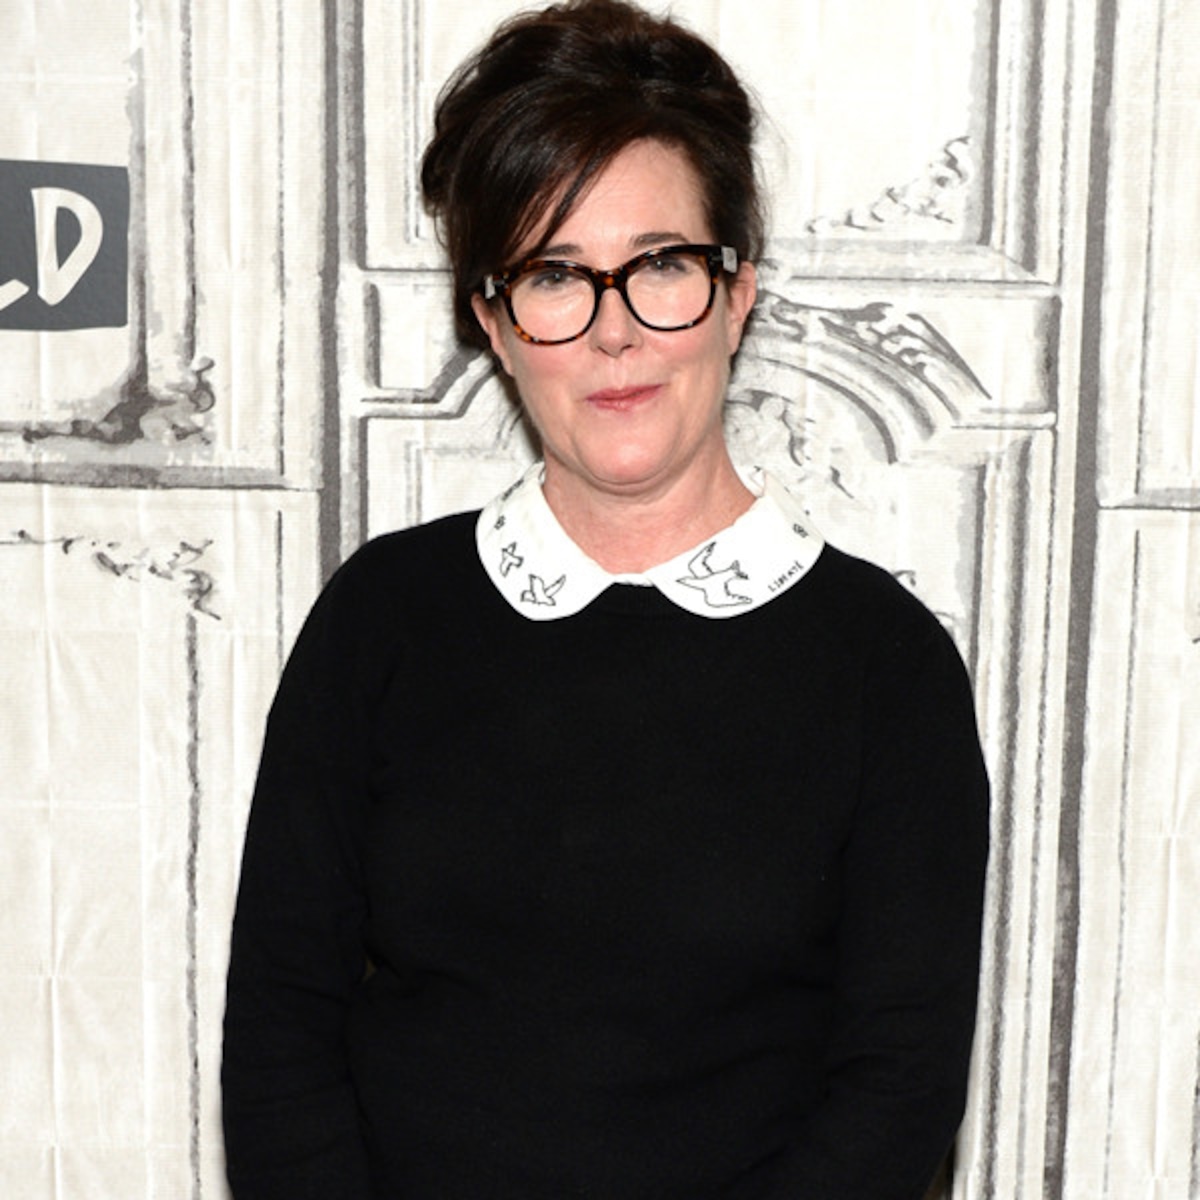 Kate Spade Found Dead at 55 After Apparent Suicide - E! Online